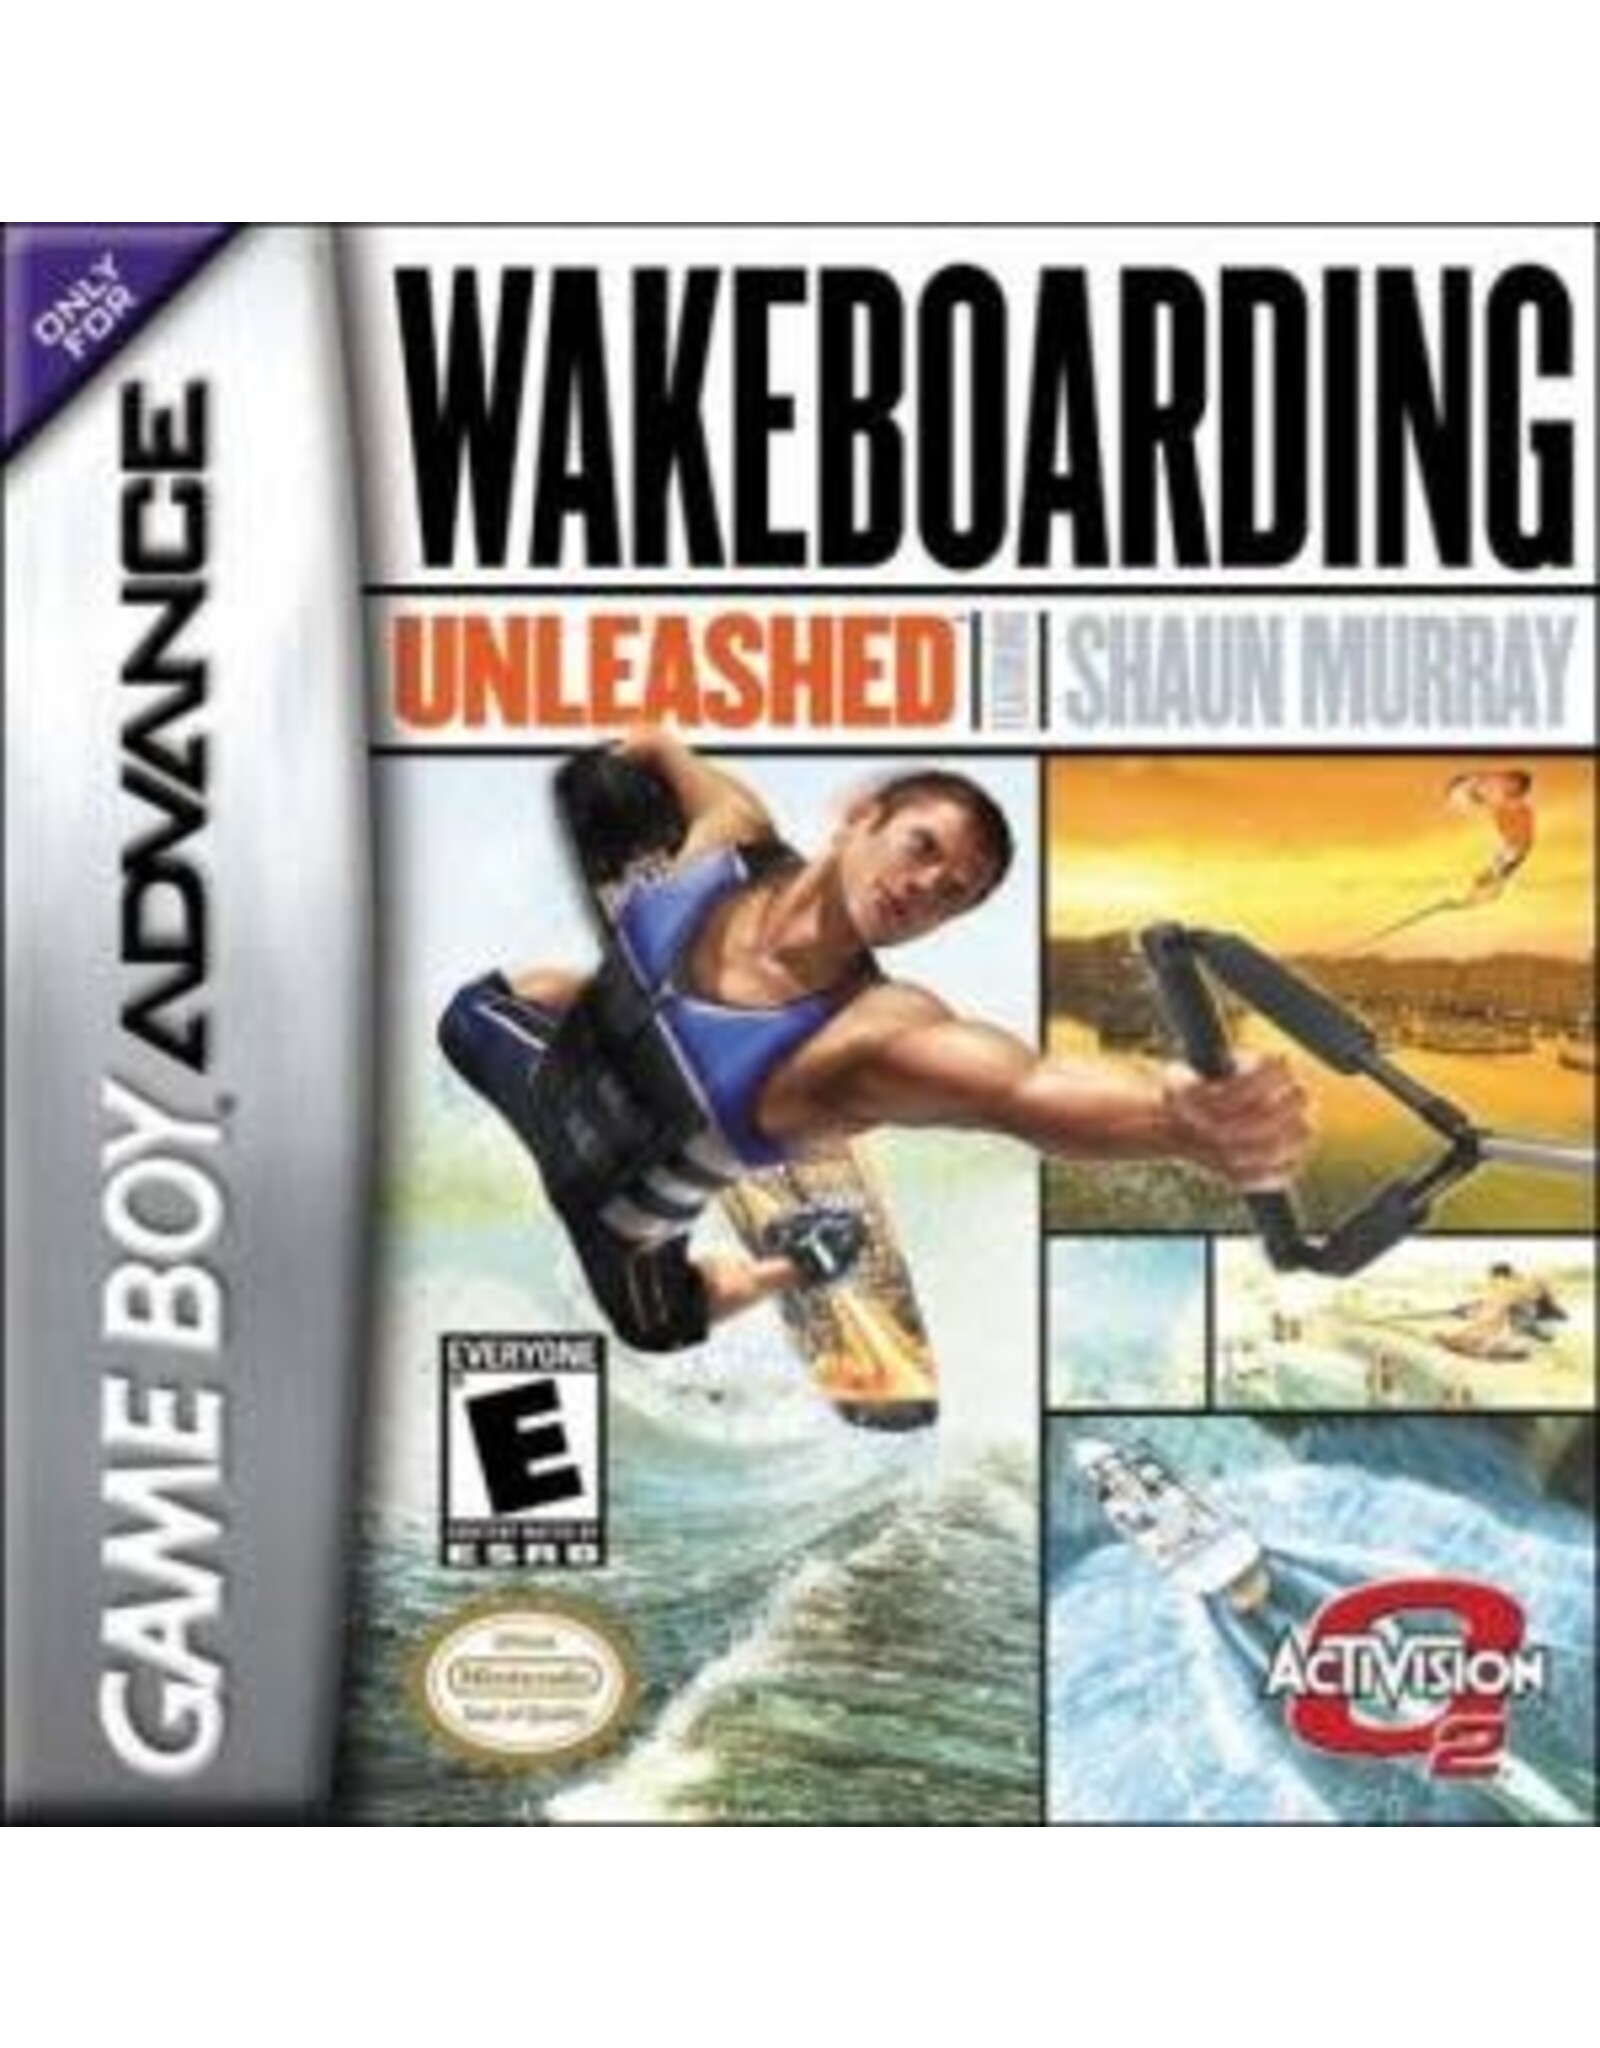 Game Boy Advance Wakeboarding Unleashed Featuring Shaun Murray (Used, Cart Only)